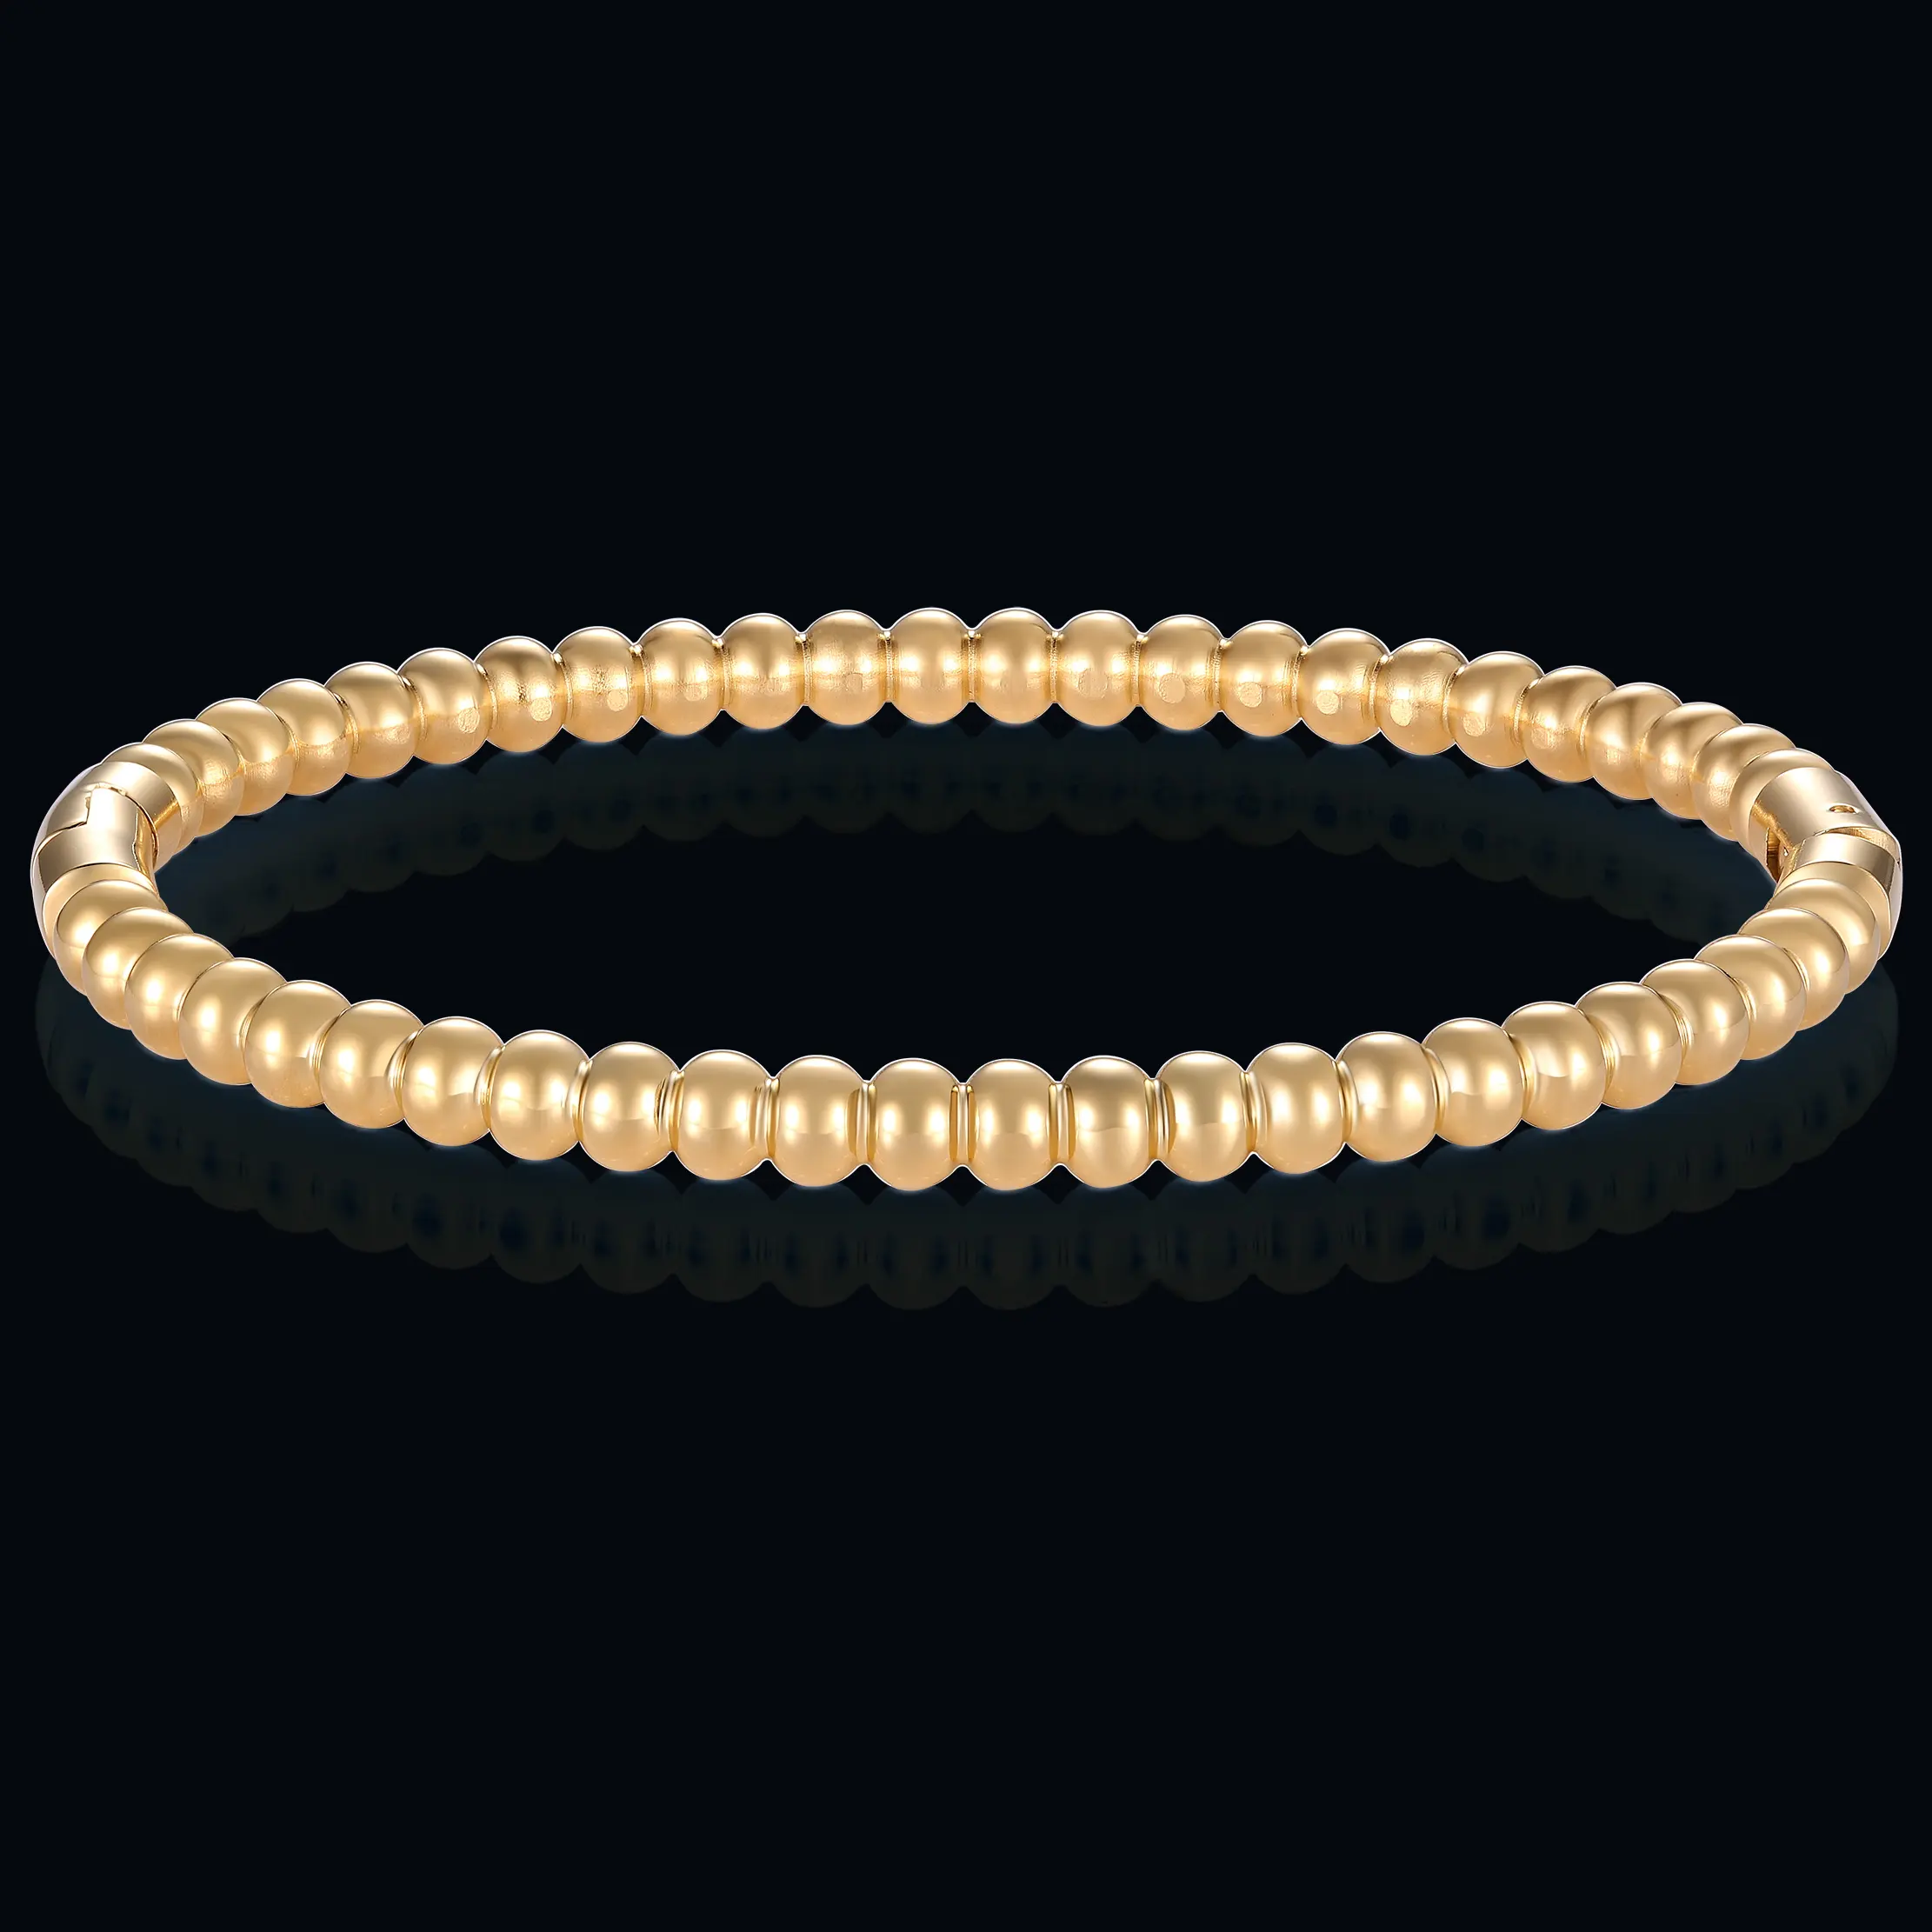 Gold Plated Charms Jewelry Bangle Bracelet Stainless Steel, 18K Gold Plated Beaded Bracelets Set